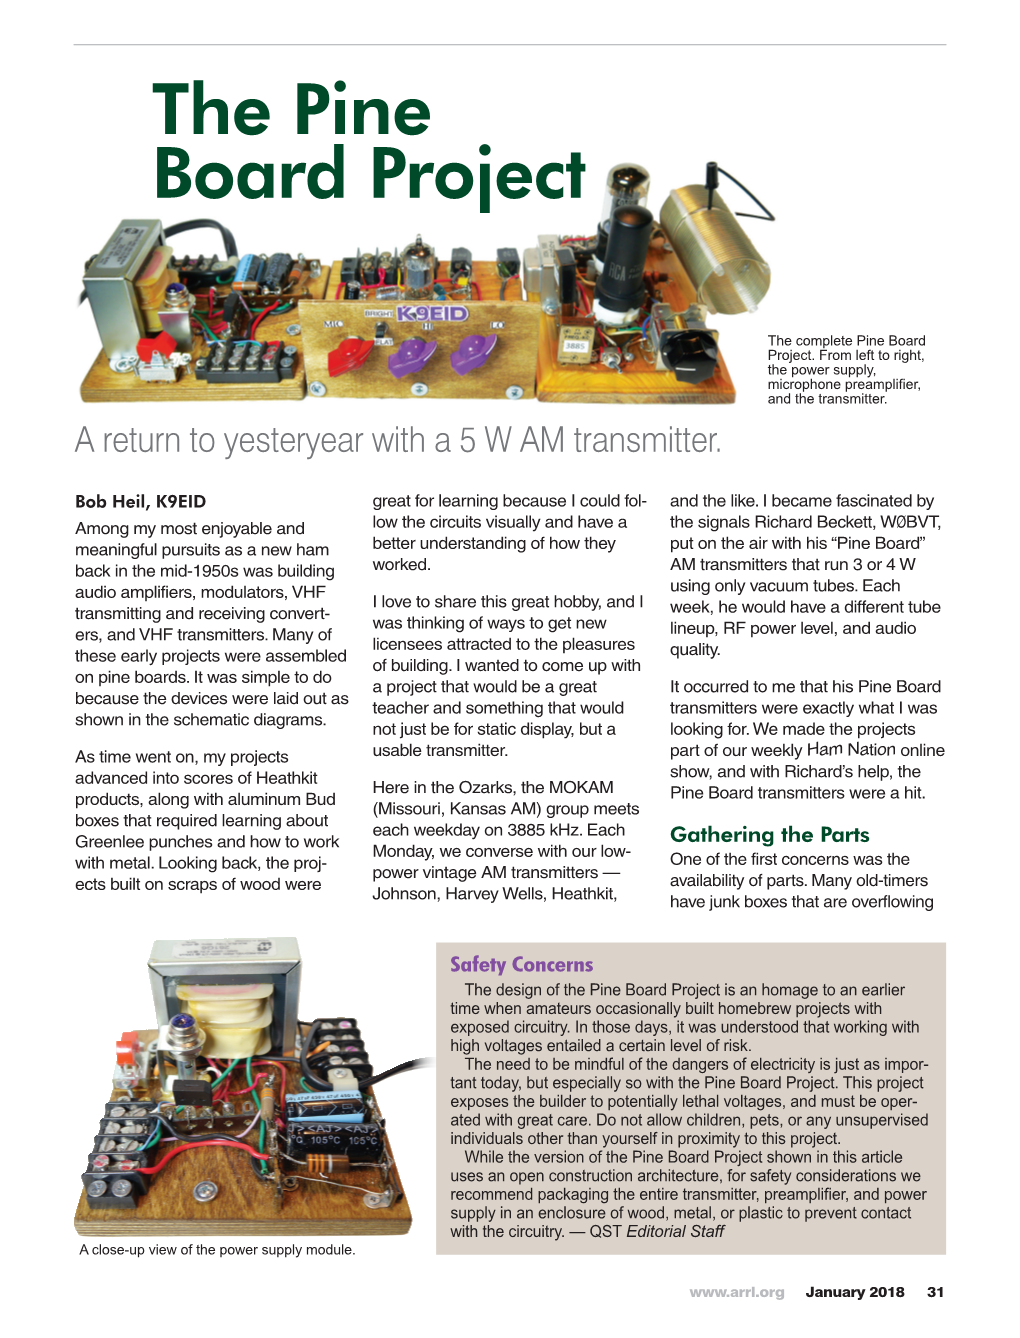 The Pine Board Project